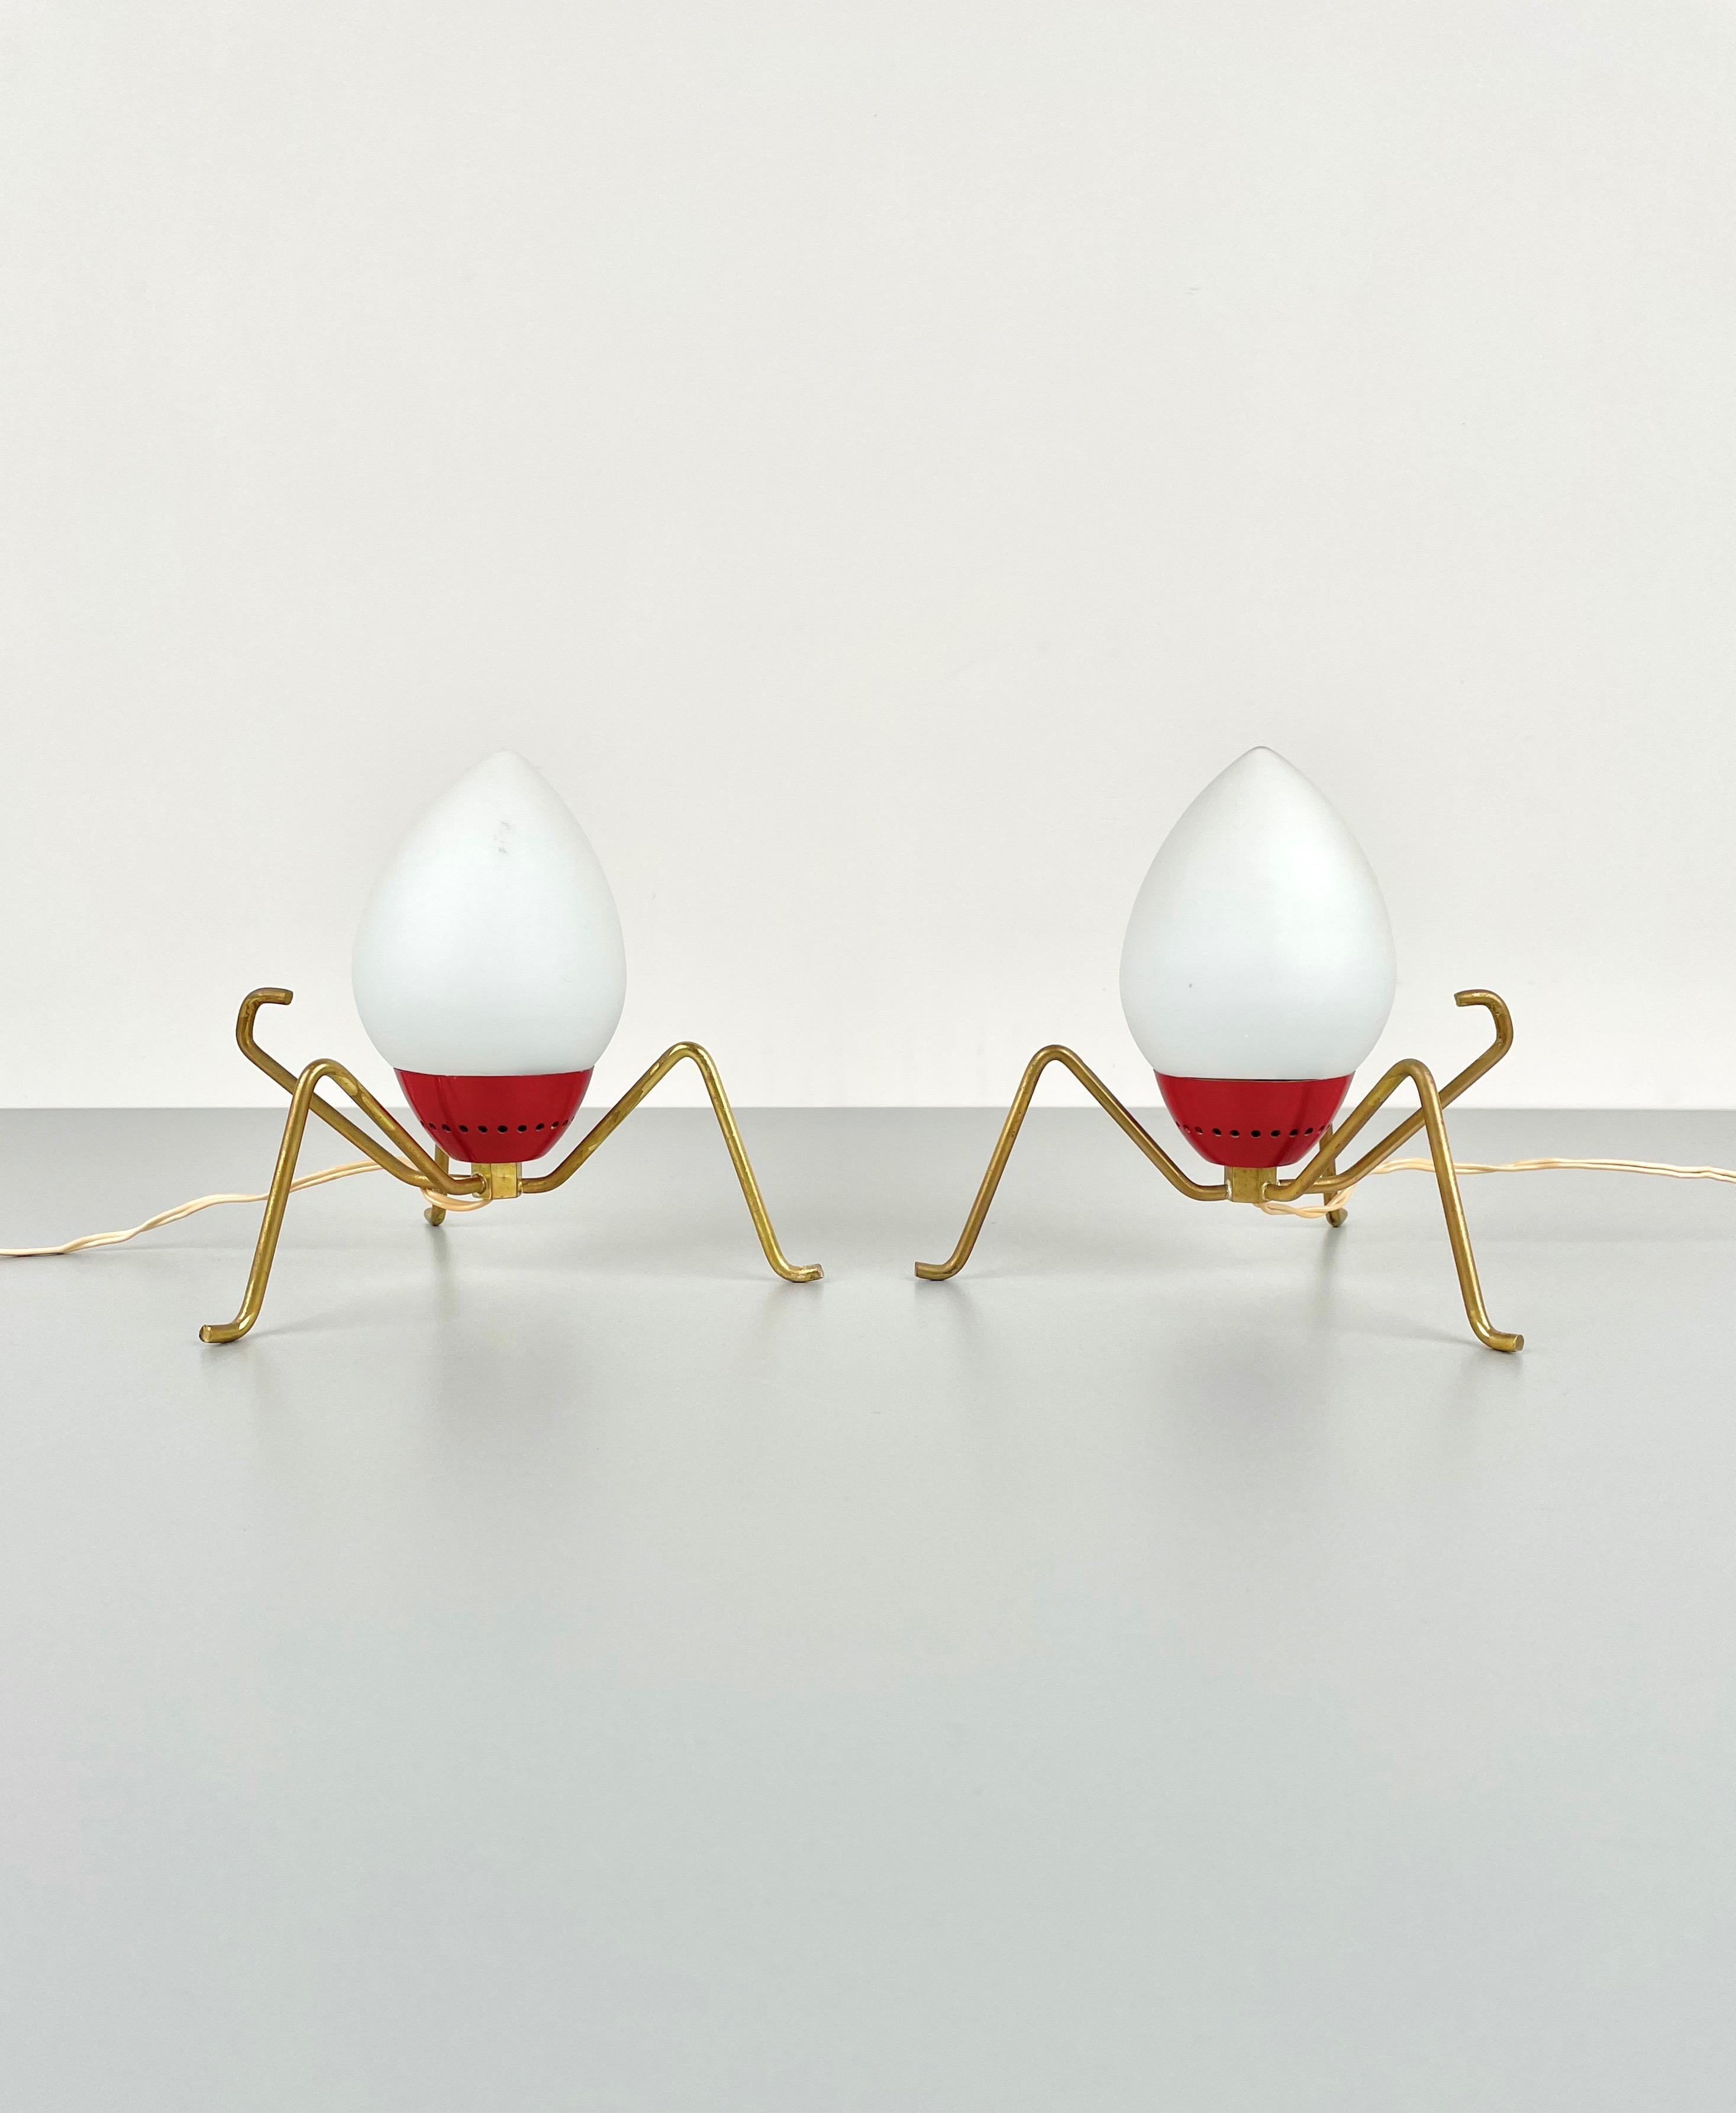 Pair of 1950s table lamps in opaline glass with brass feet that resemble spider's legs in the style of Stilnovo, Italy.